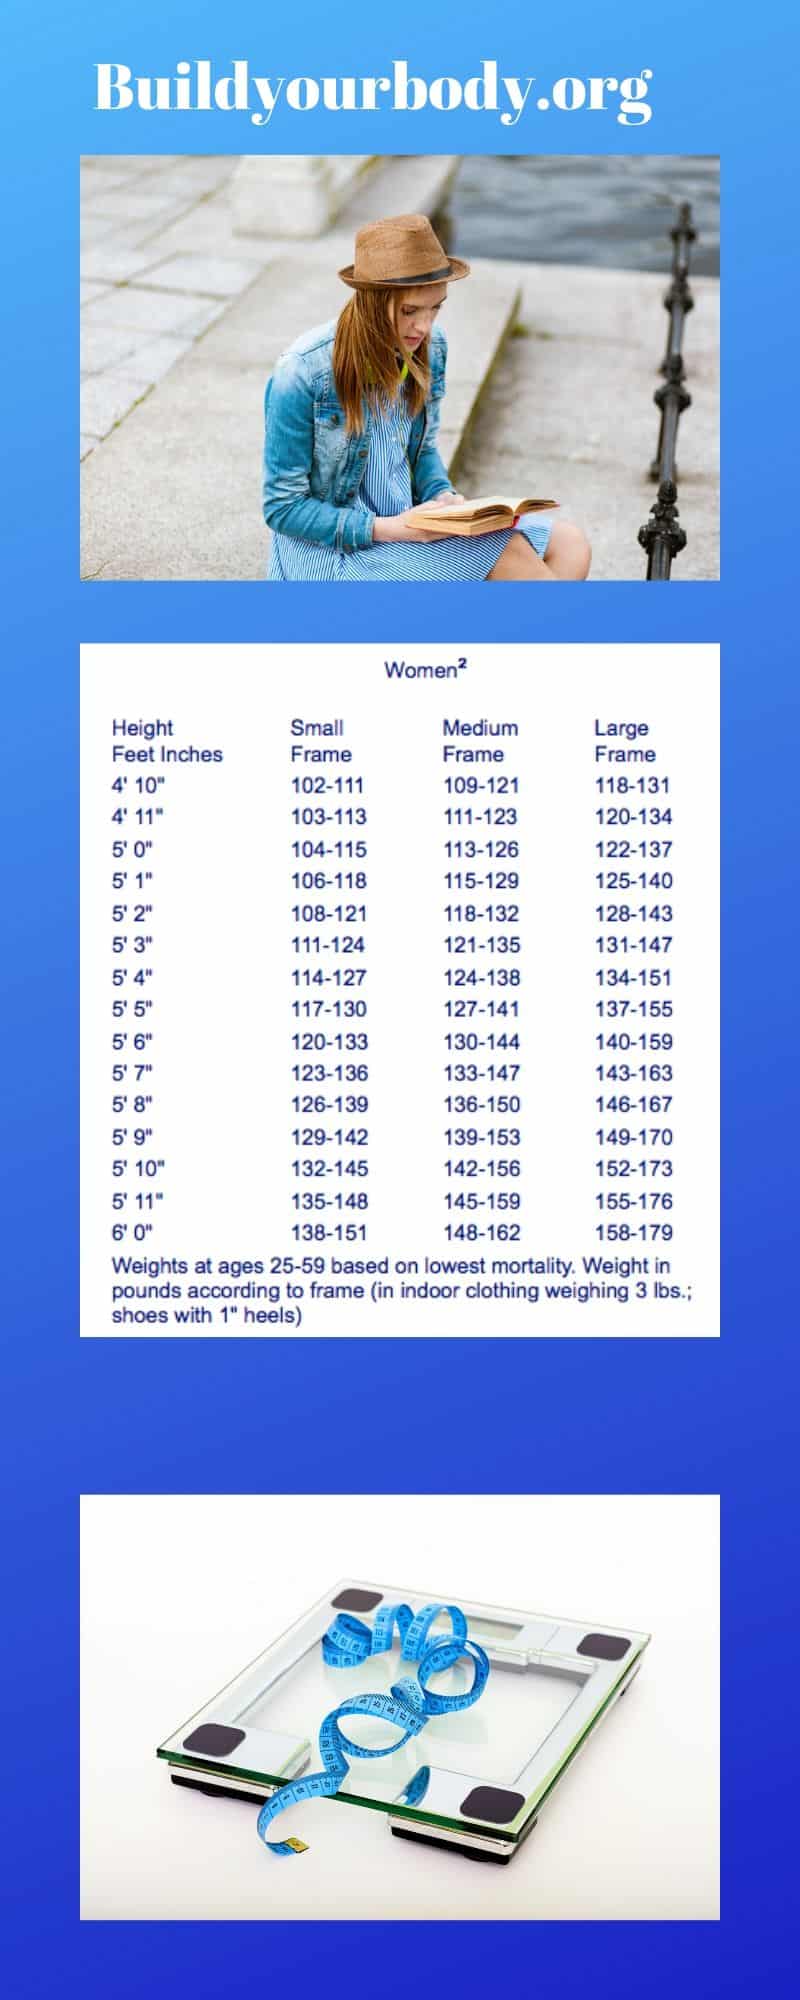 ideal weight according to heigh chart